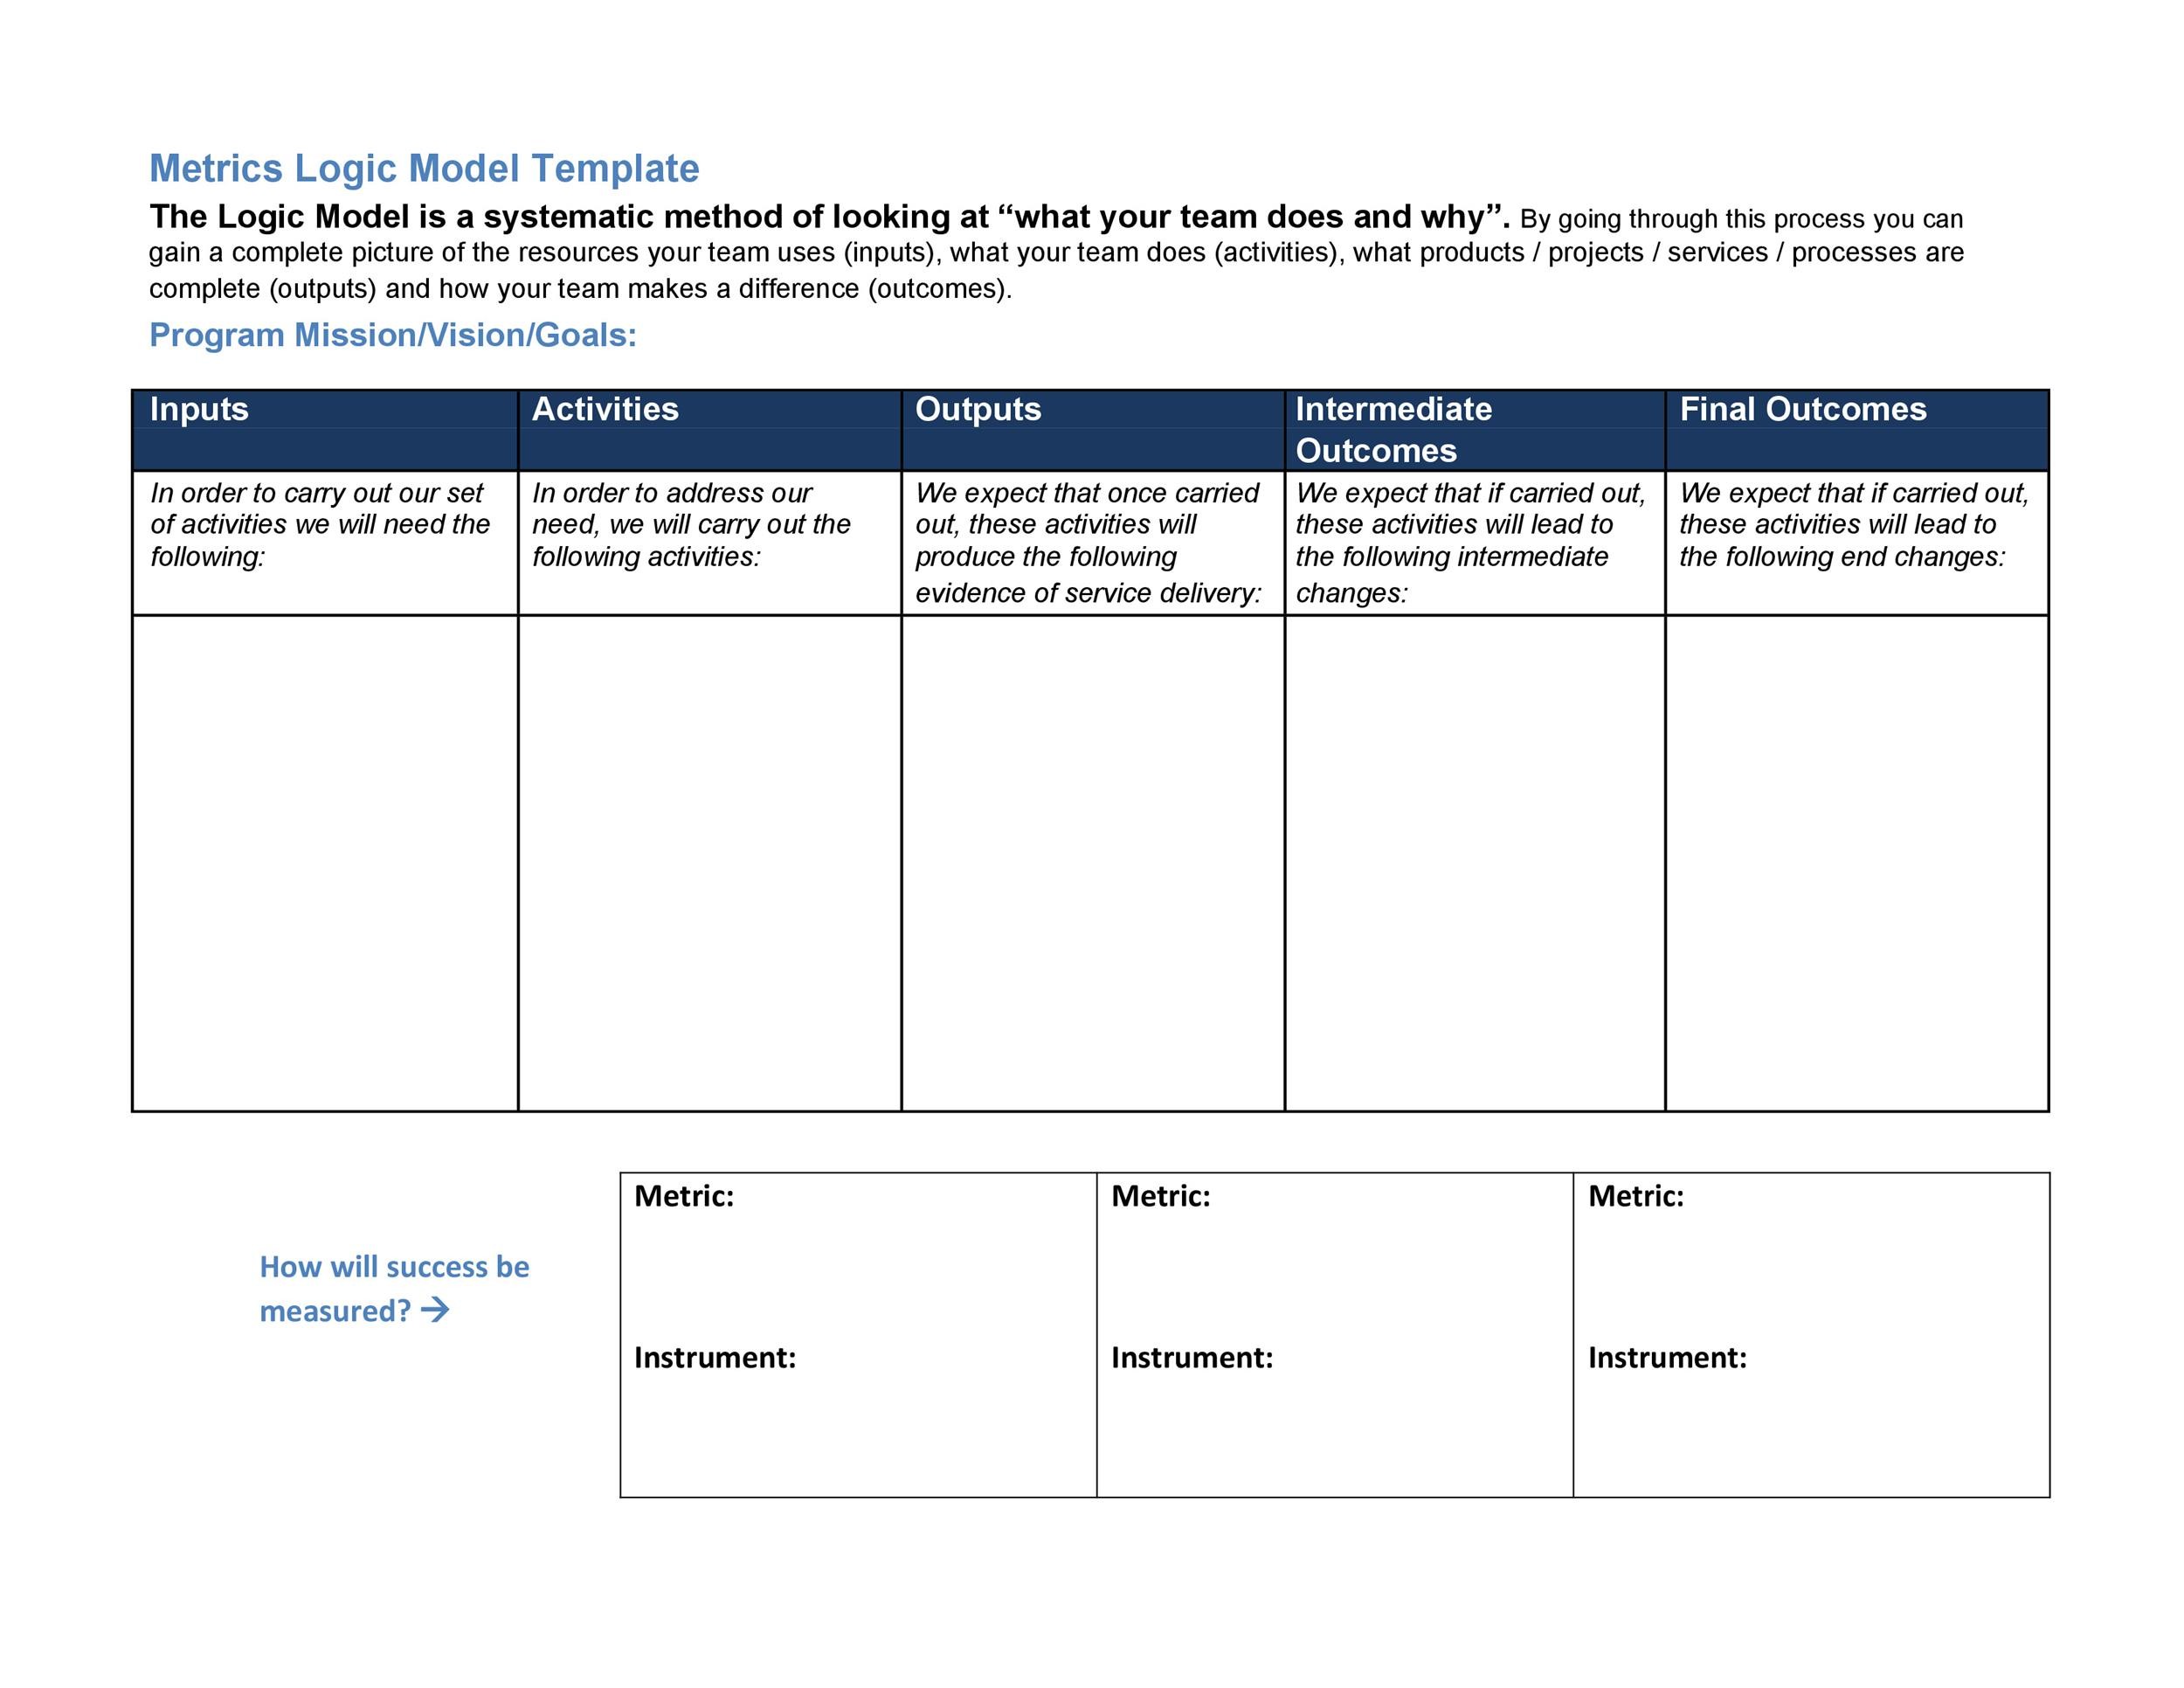 Fillable Logic Model Template from templatelab.com